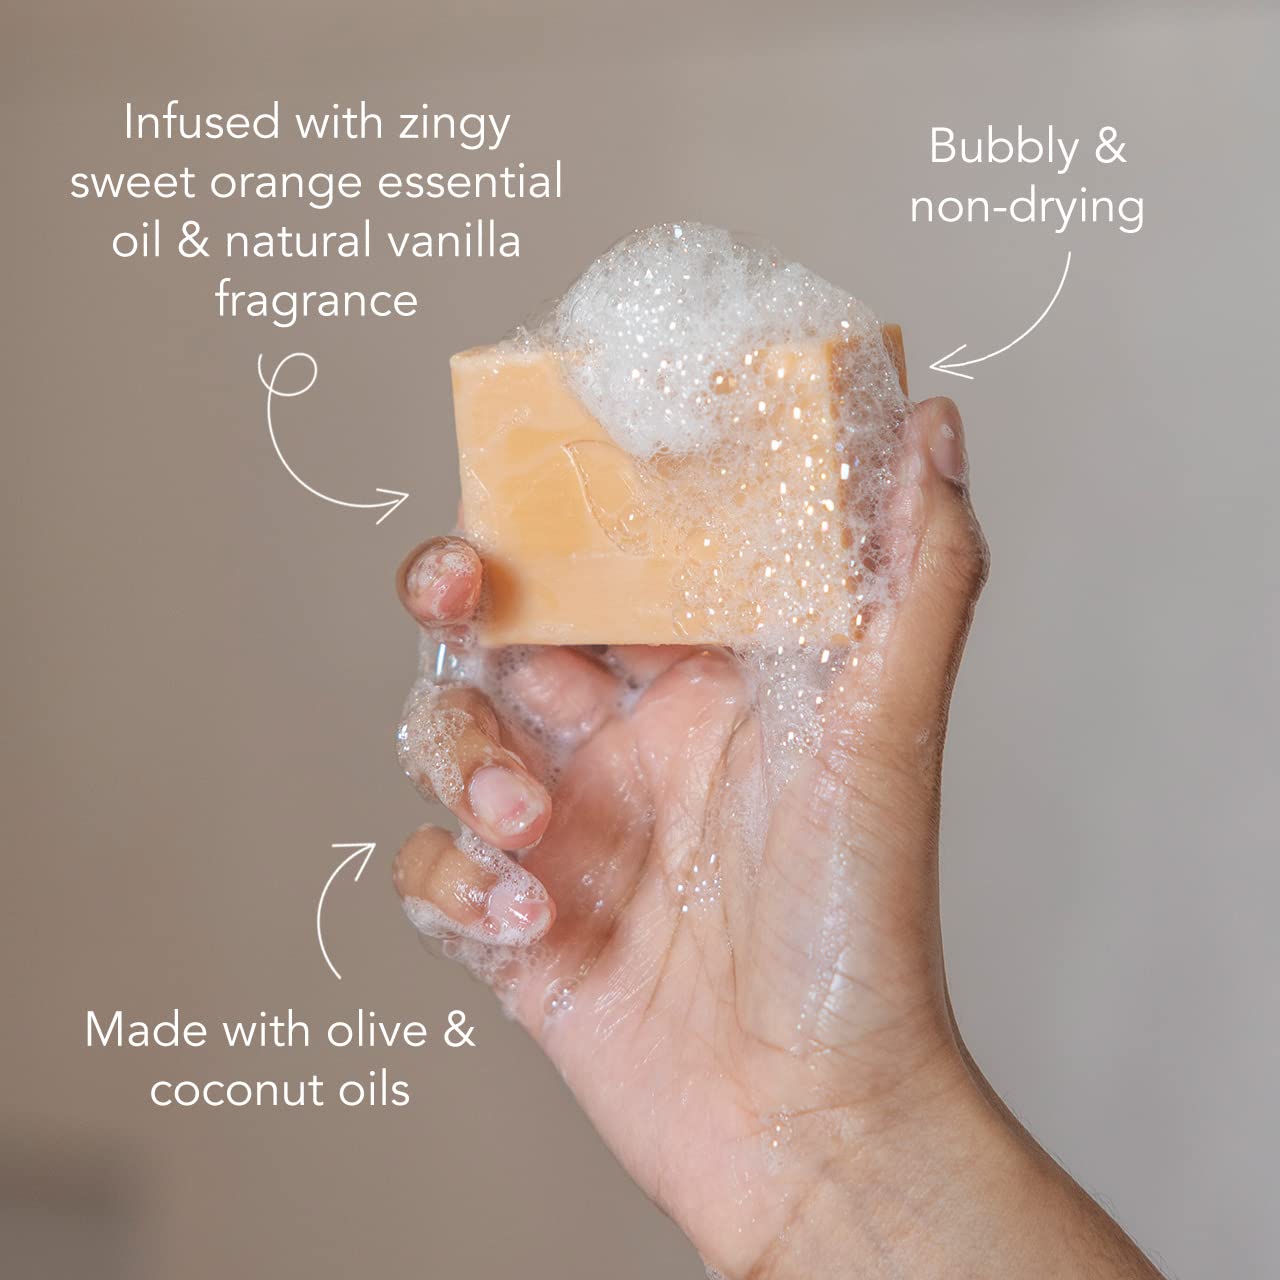 Ethique Uplifting Sweet Orange & Vanilla Soap Bar - Body Wash for All Skin Types - Plastic-Free, Vegan, Cruelty-Free, Eco-Friendly, 4.23 oz (Pack of 1) : Beauty & Personal Care